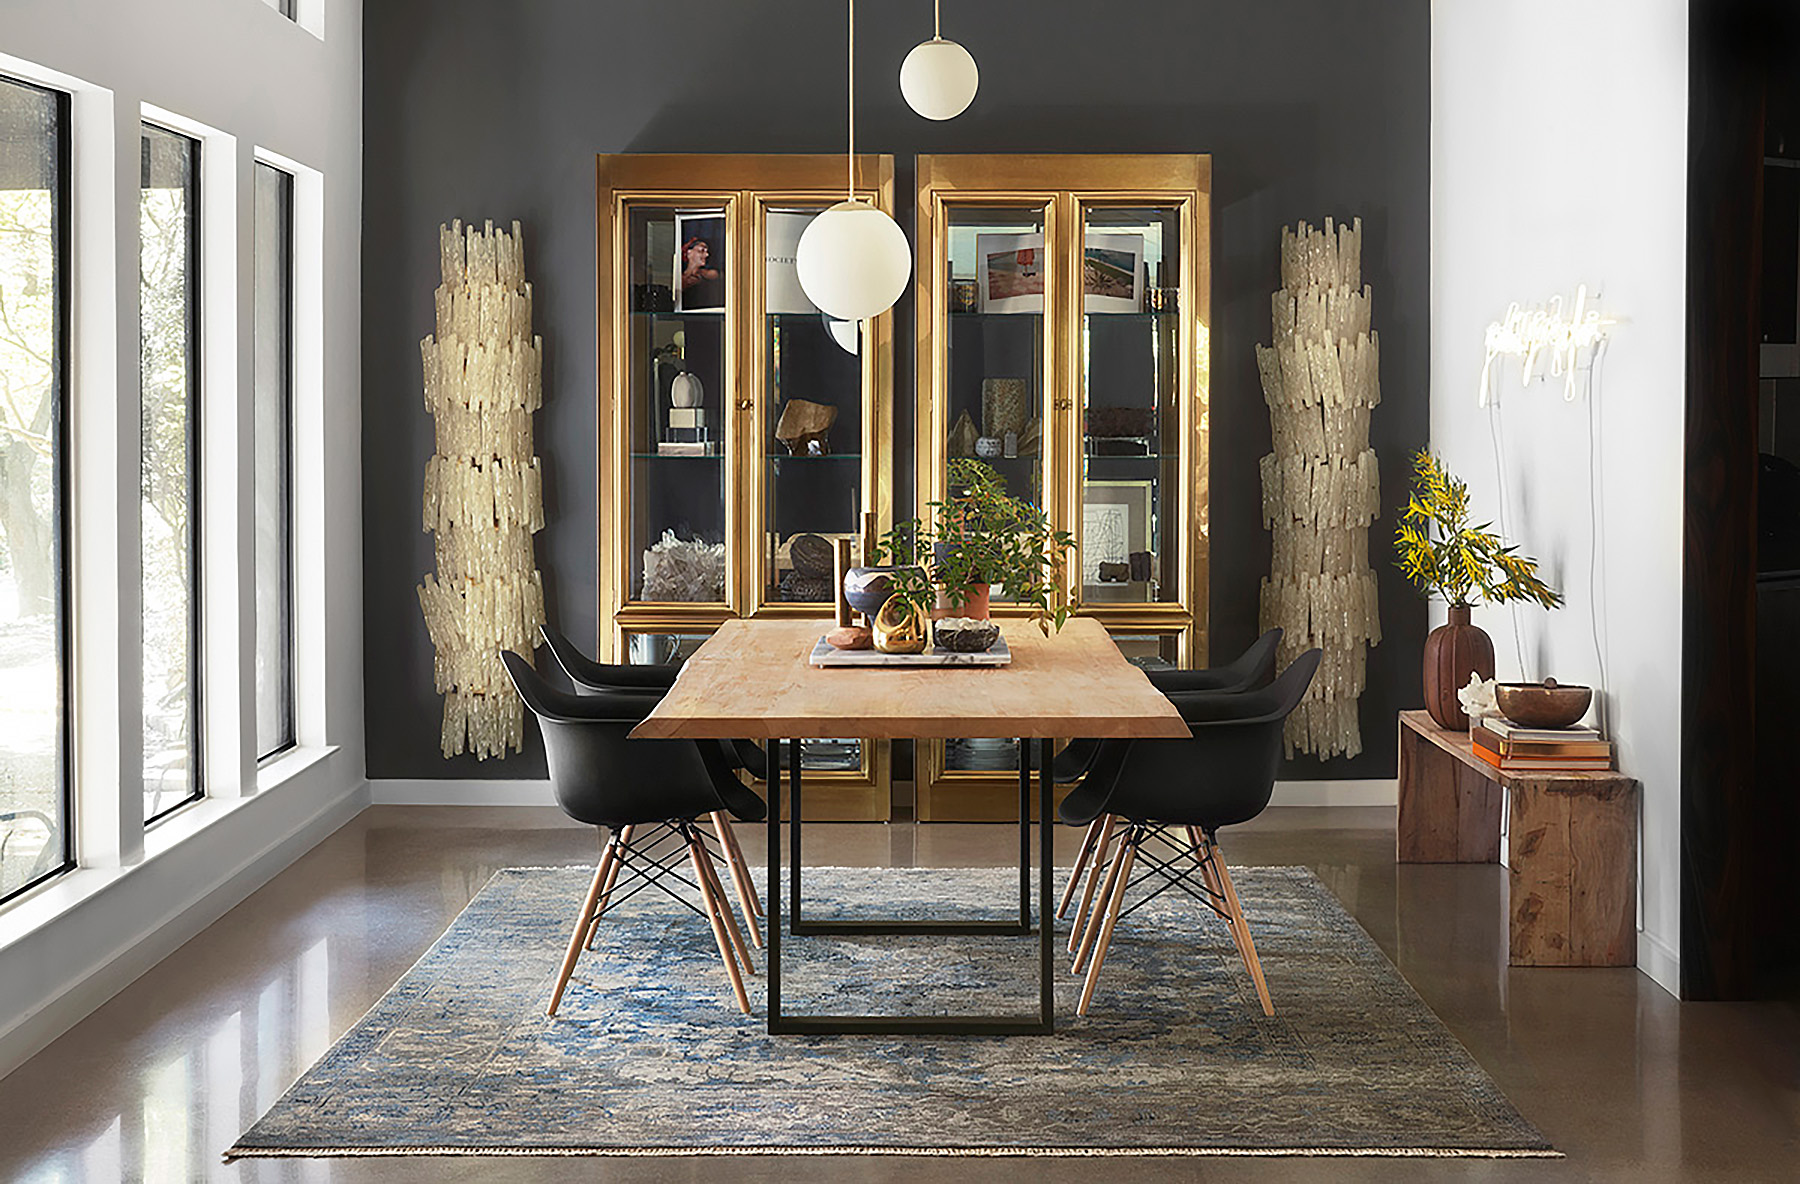 Benefits of a Dining Table Rug - Introduce Texture and Color: A carefully chosen rug can complement or contrast with your dining furniture, adding layers of texture and a splash of color to your room.